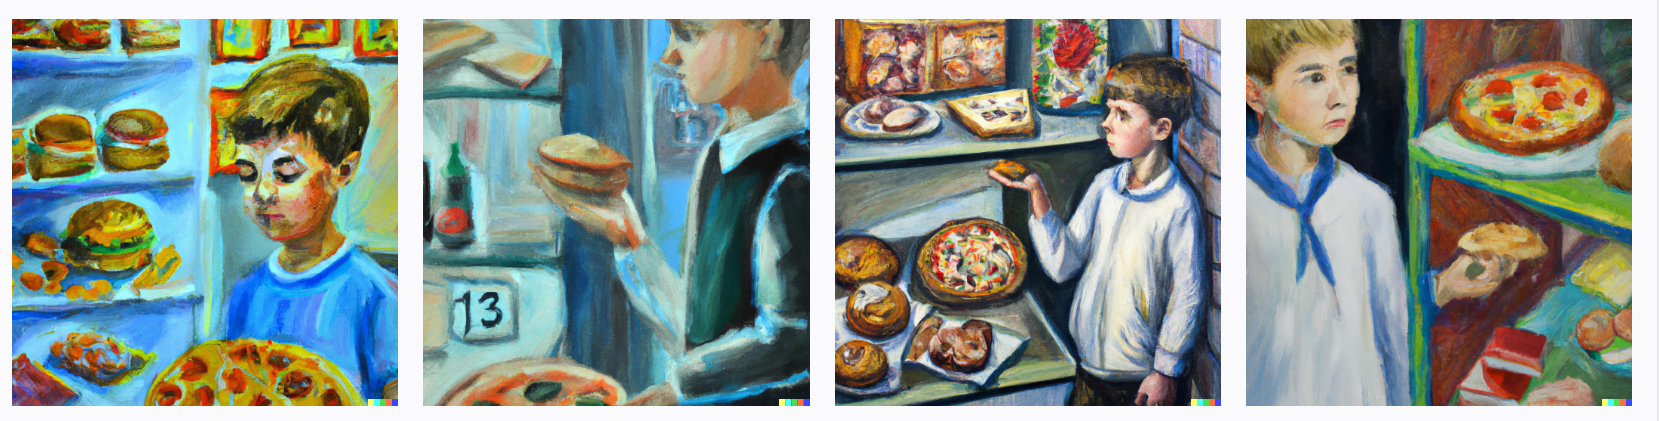 Schoolboy chooses food in the cafeteria, pizza and buns in the showcase, a picture from a math magazine,oil painting